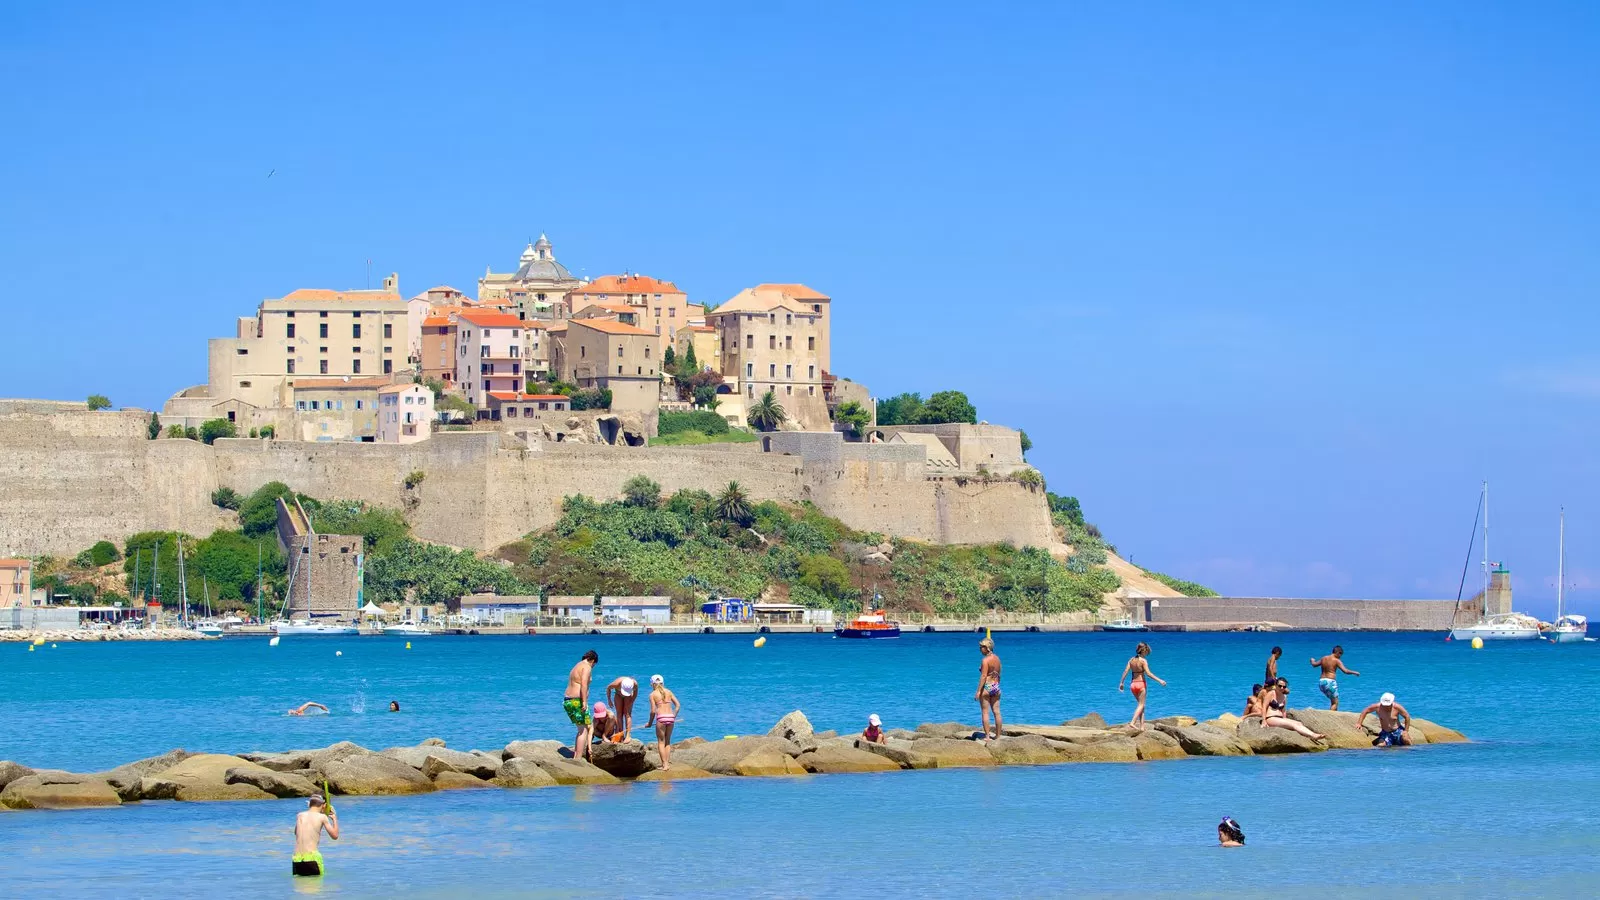 What to Do and See When in Corsica?